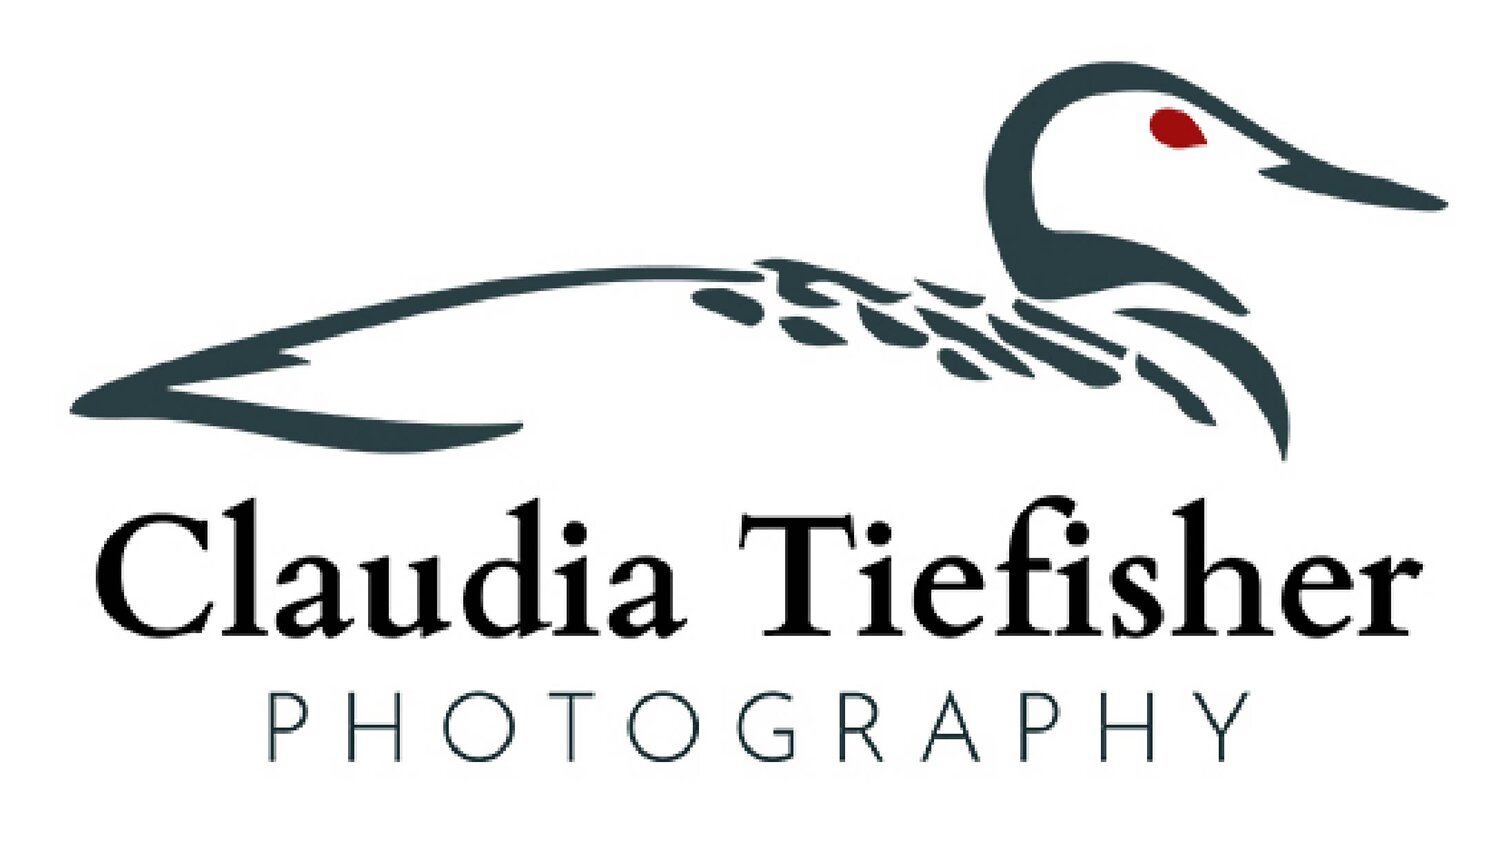 Claudia Tiefisher Photography